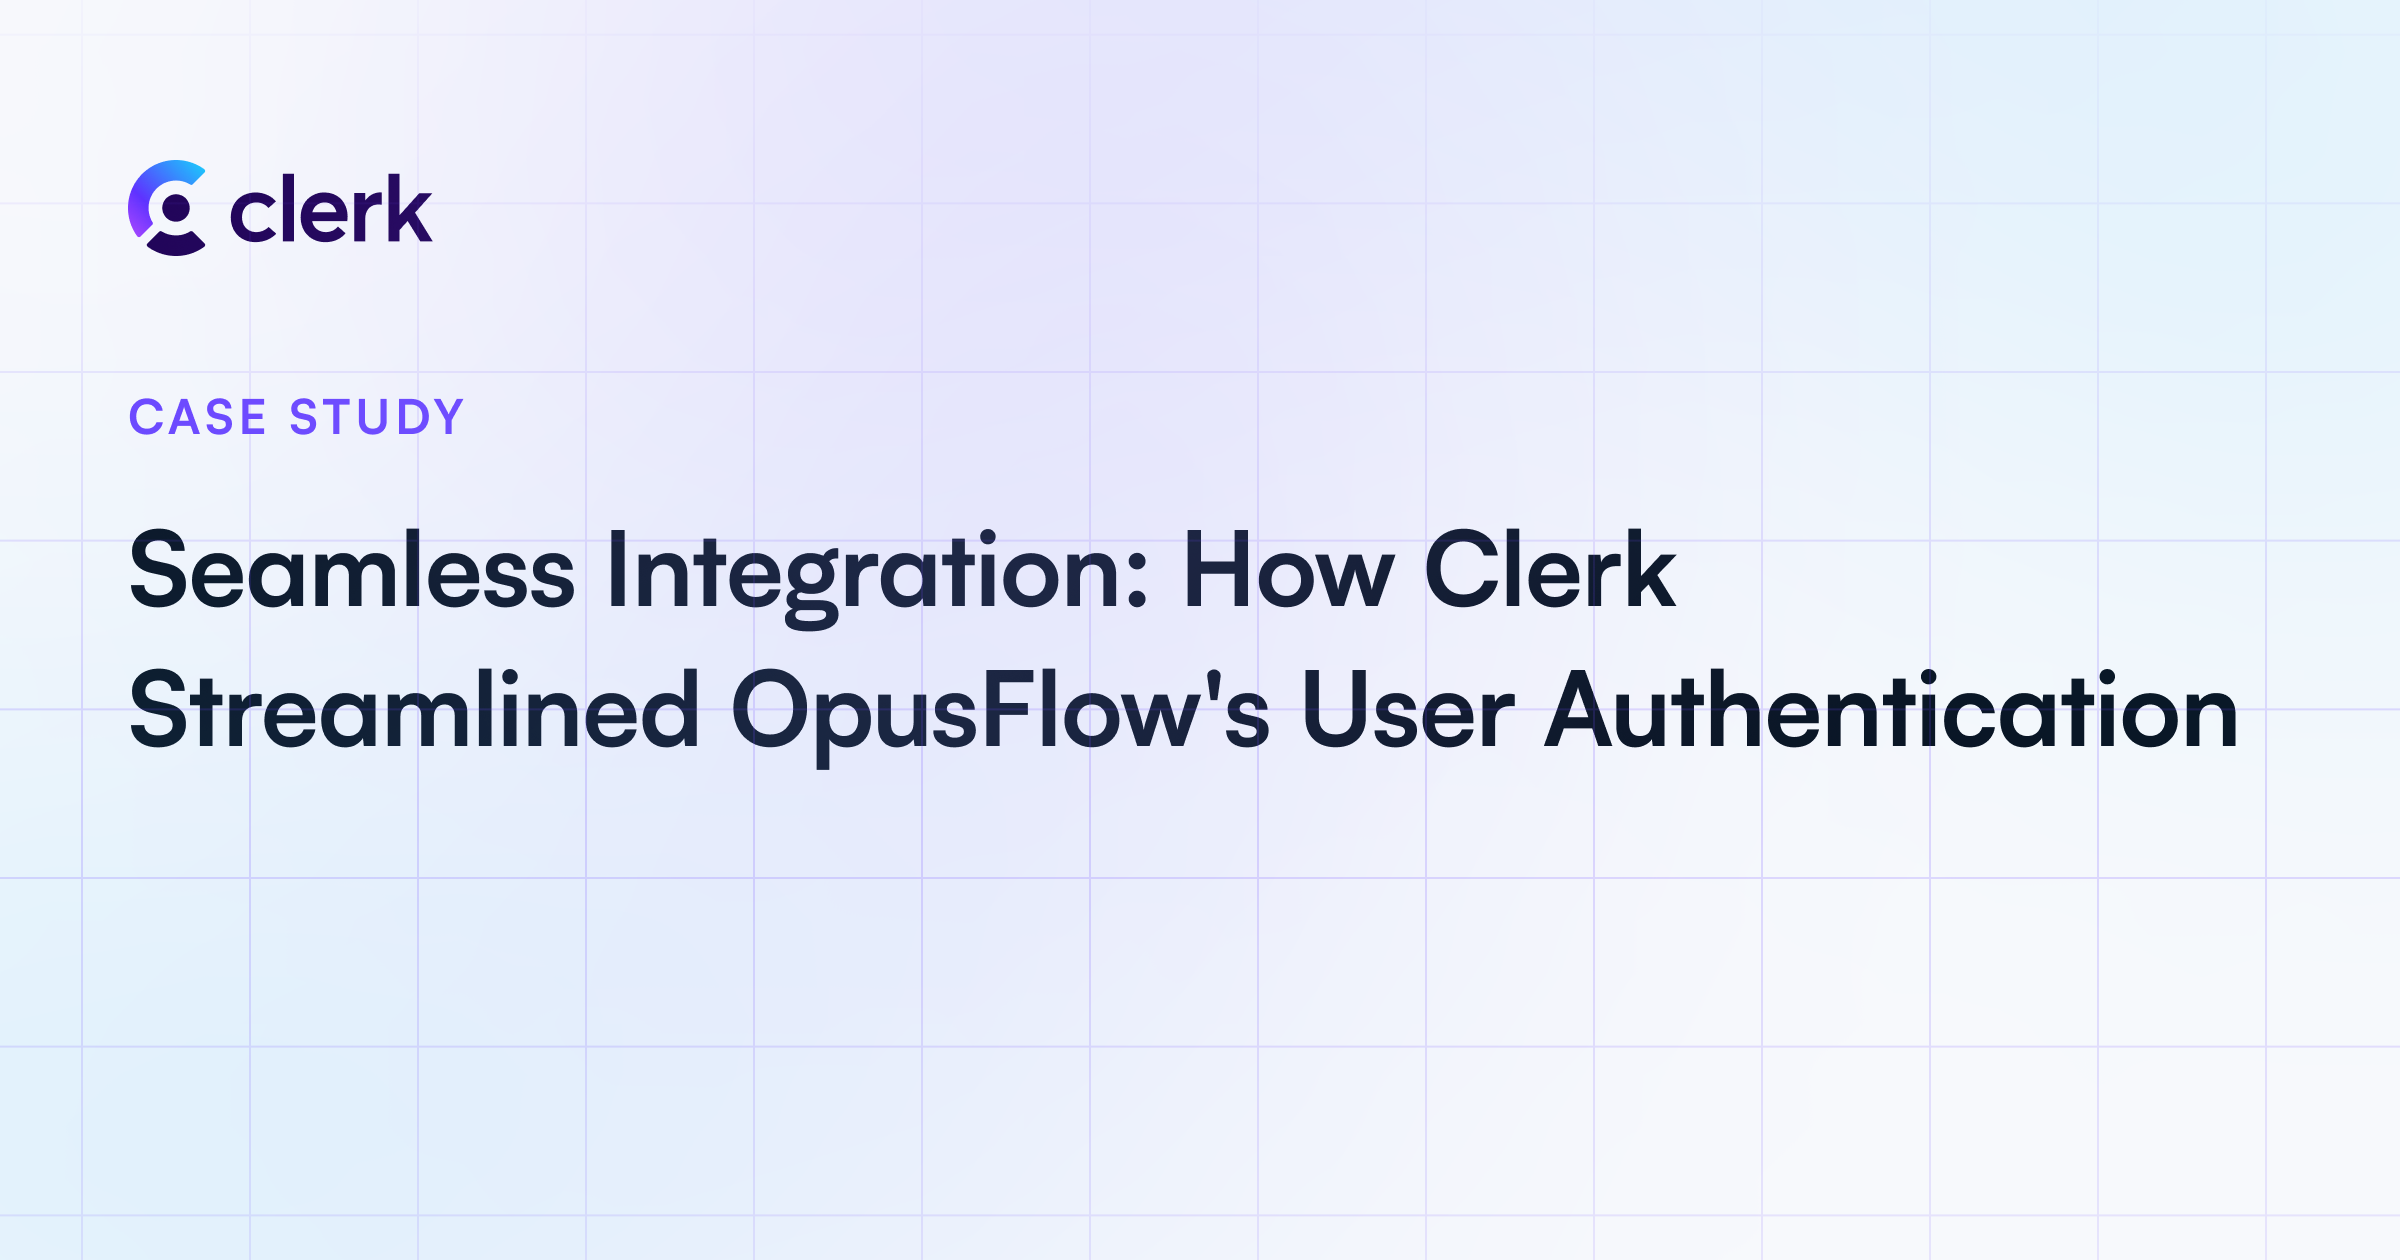 Seamless Integration: How Clerk Streamlined OpusFlow's User Authentication